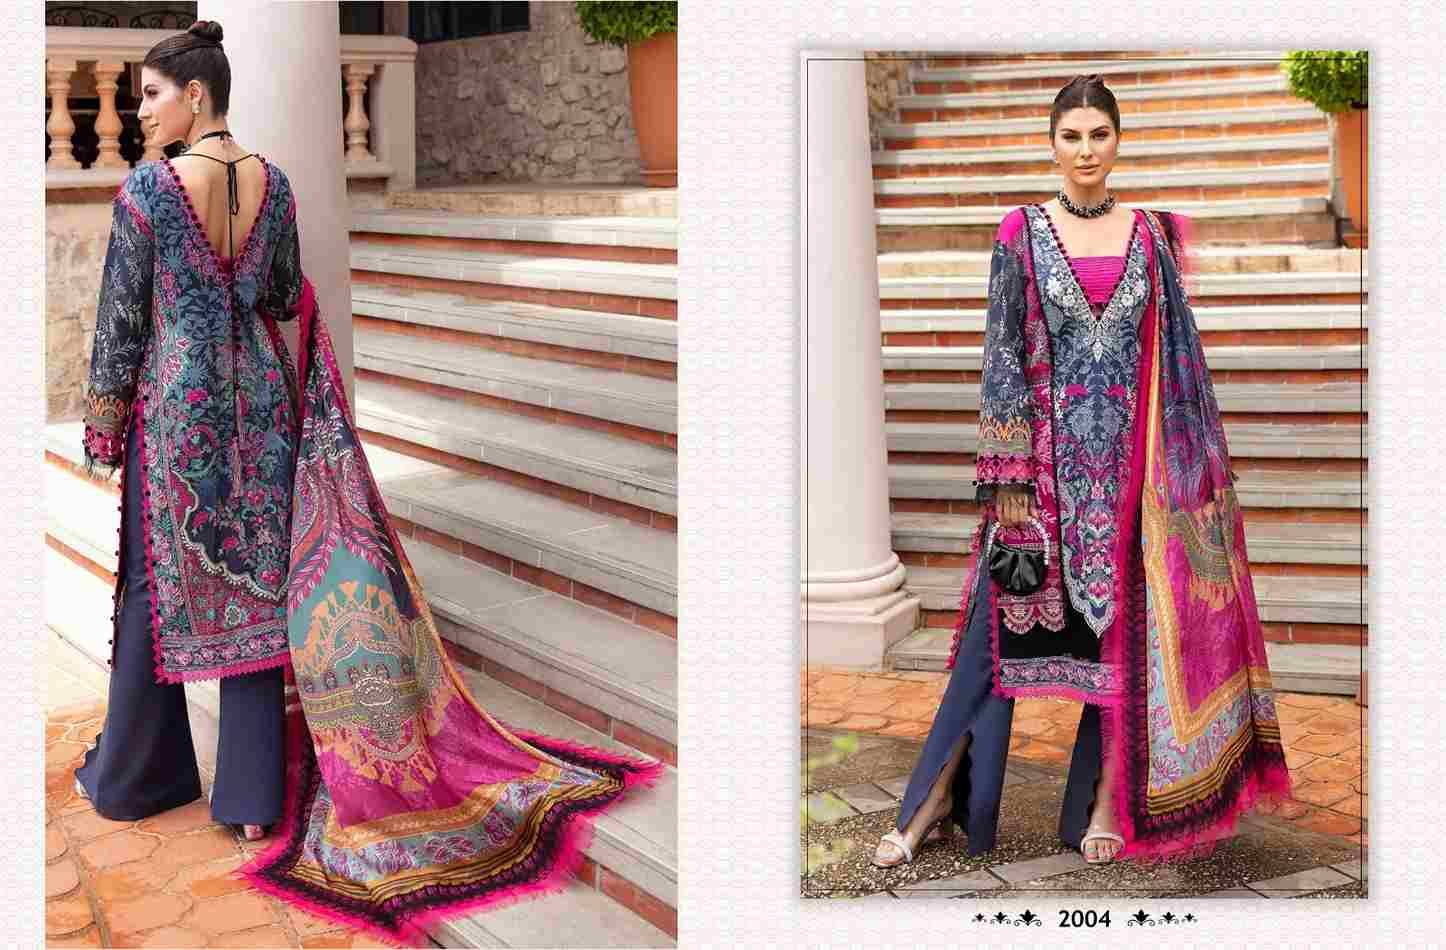 Bliss Vol-2 By Shraddha Designer 2001 To 2006 Series Beautiful Festive Suits Colorful Stylish Fancy Casual Wear & Ethnic Wear Lawn Cotton Embroidered Dresses At Wholesale Price